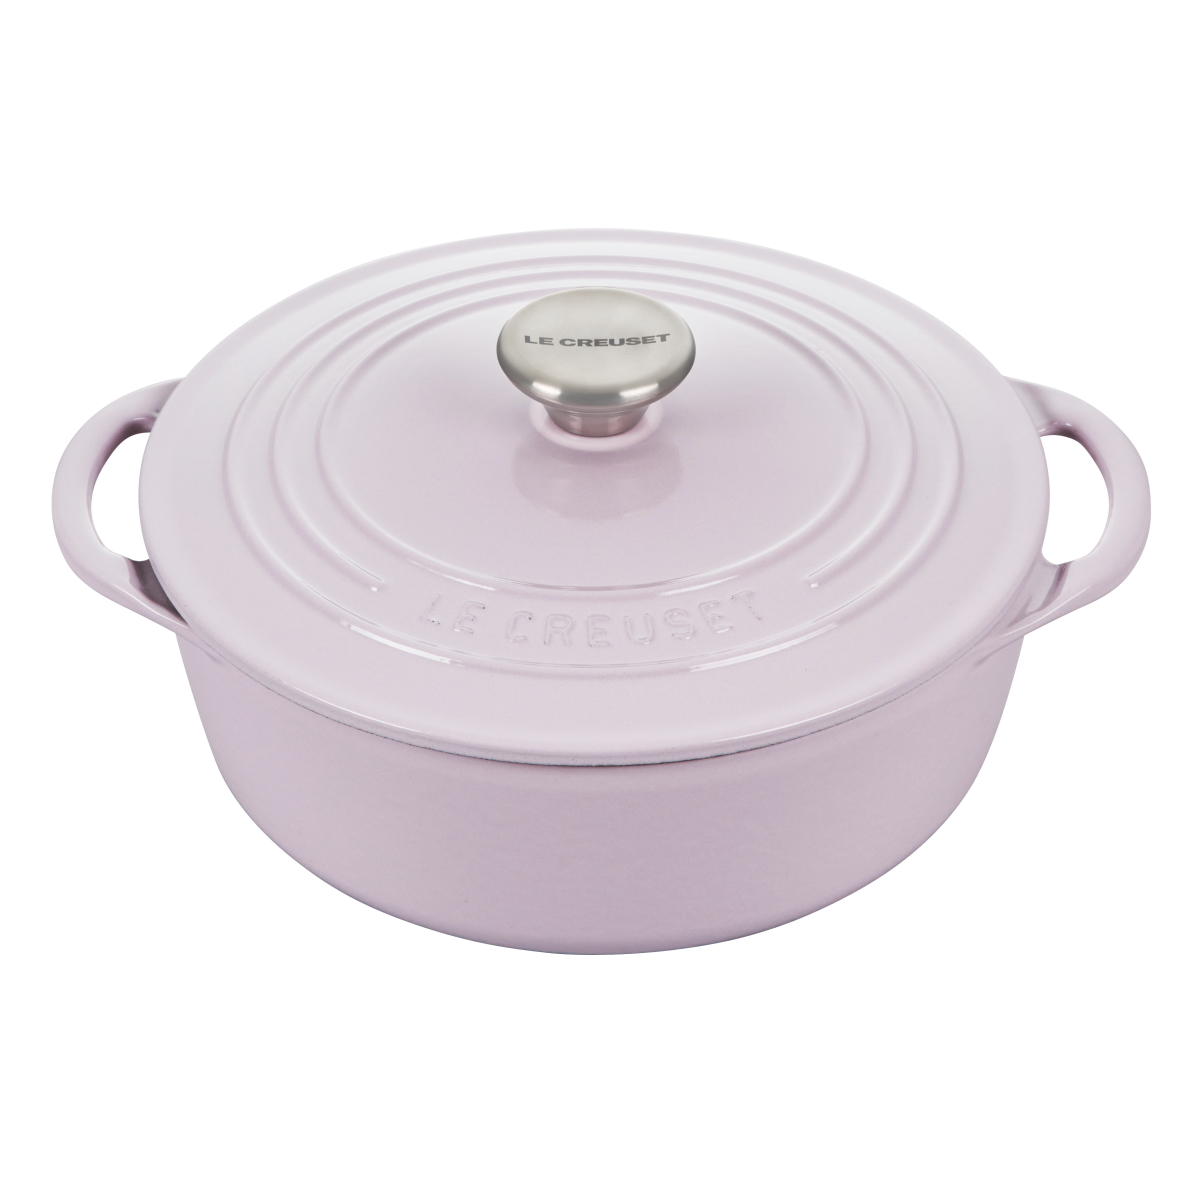 https://www.berings.com/wp-content/uploads/2023/04/Le-Creuset-Shallow-Round-Oven-Shallow.jpg